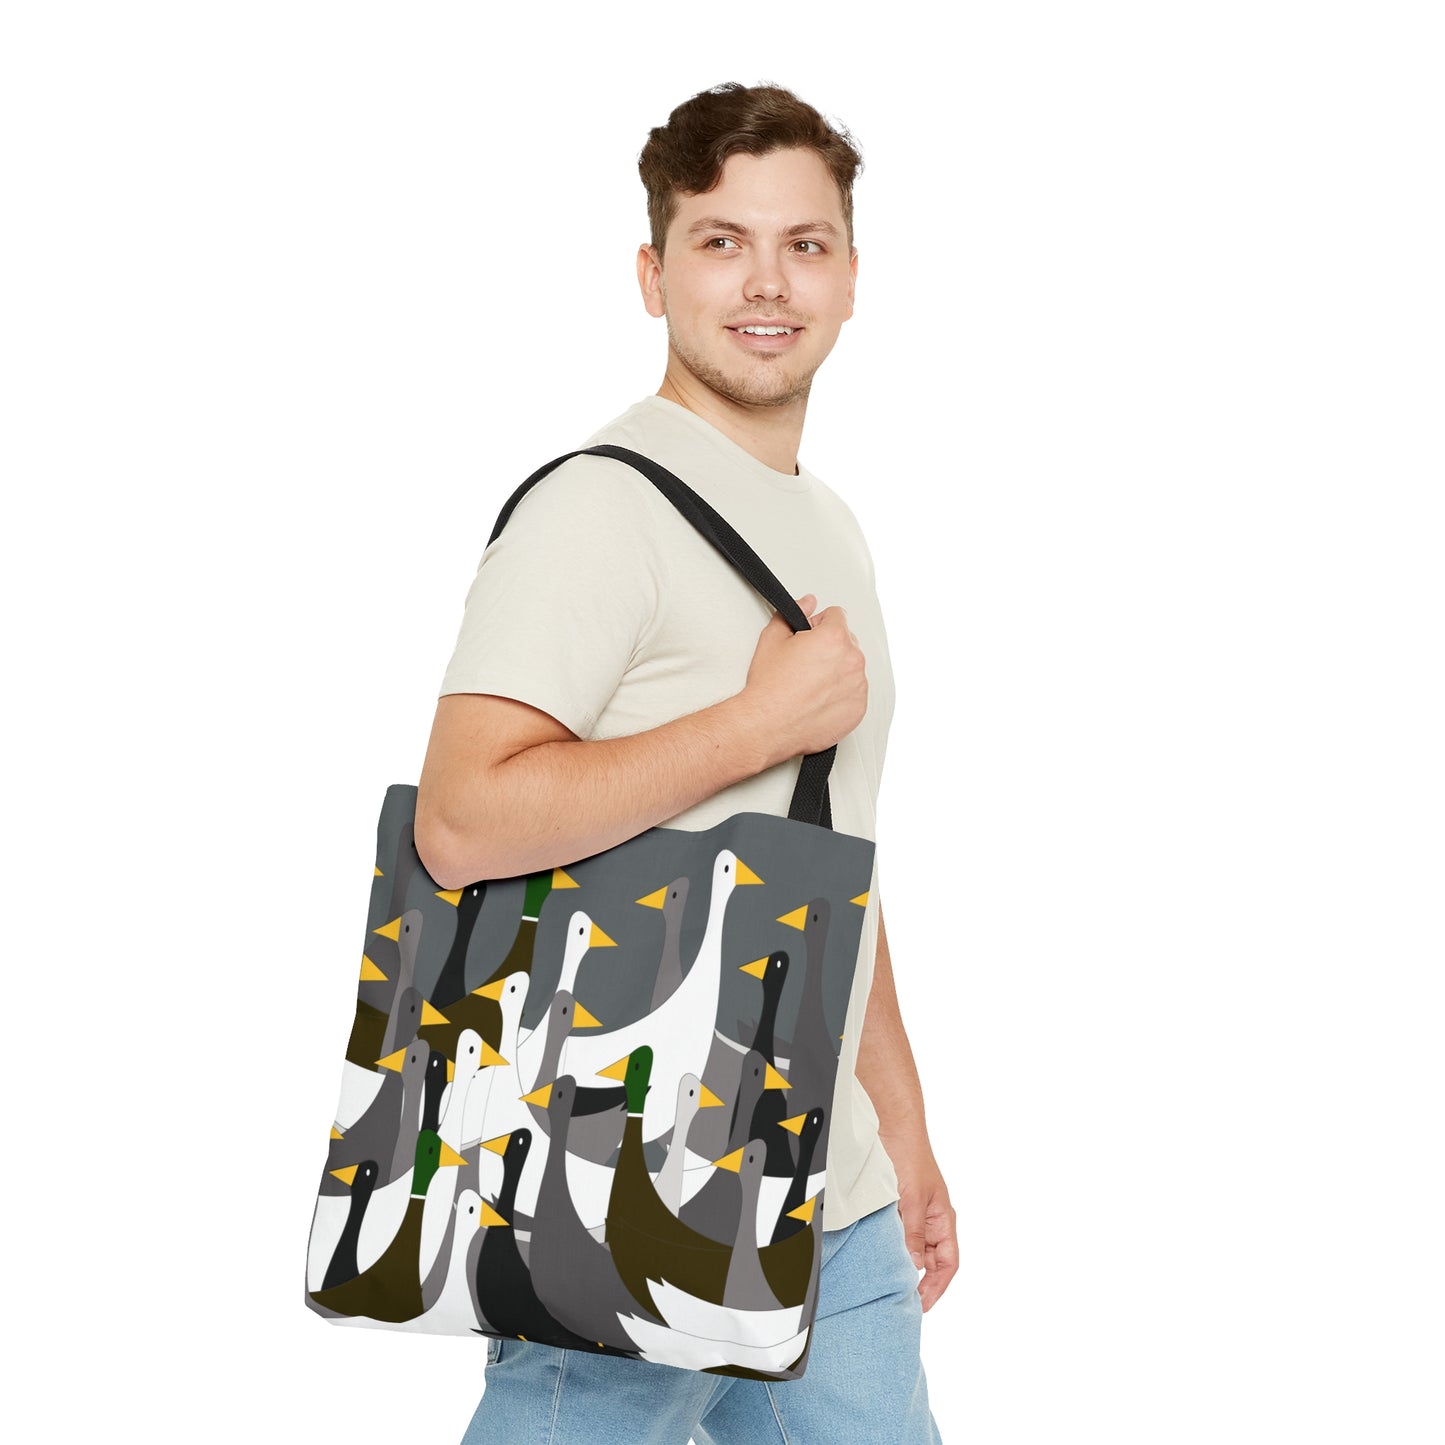 Not as many ducks - Dim Gray 646a6a- Tote Bag